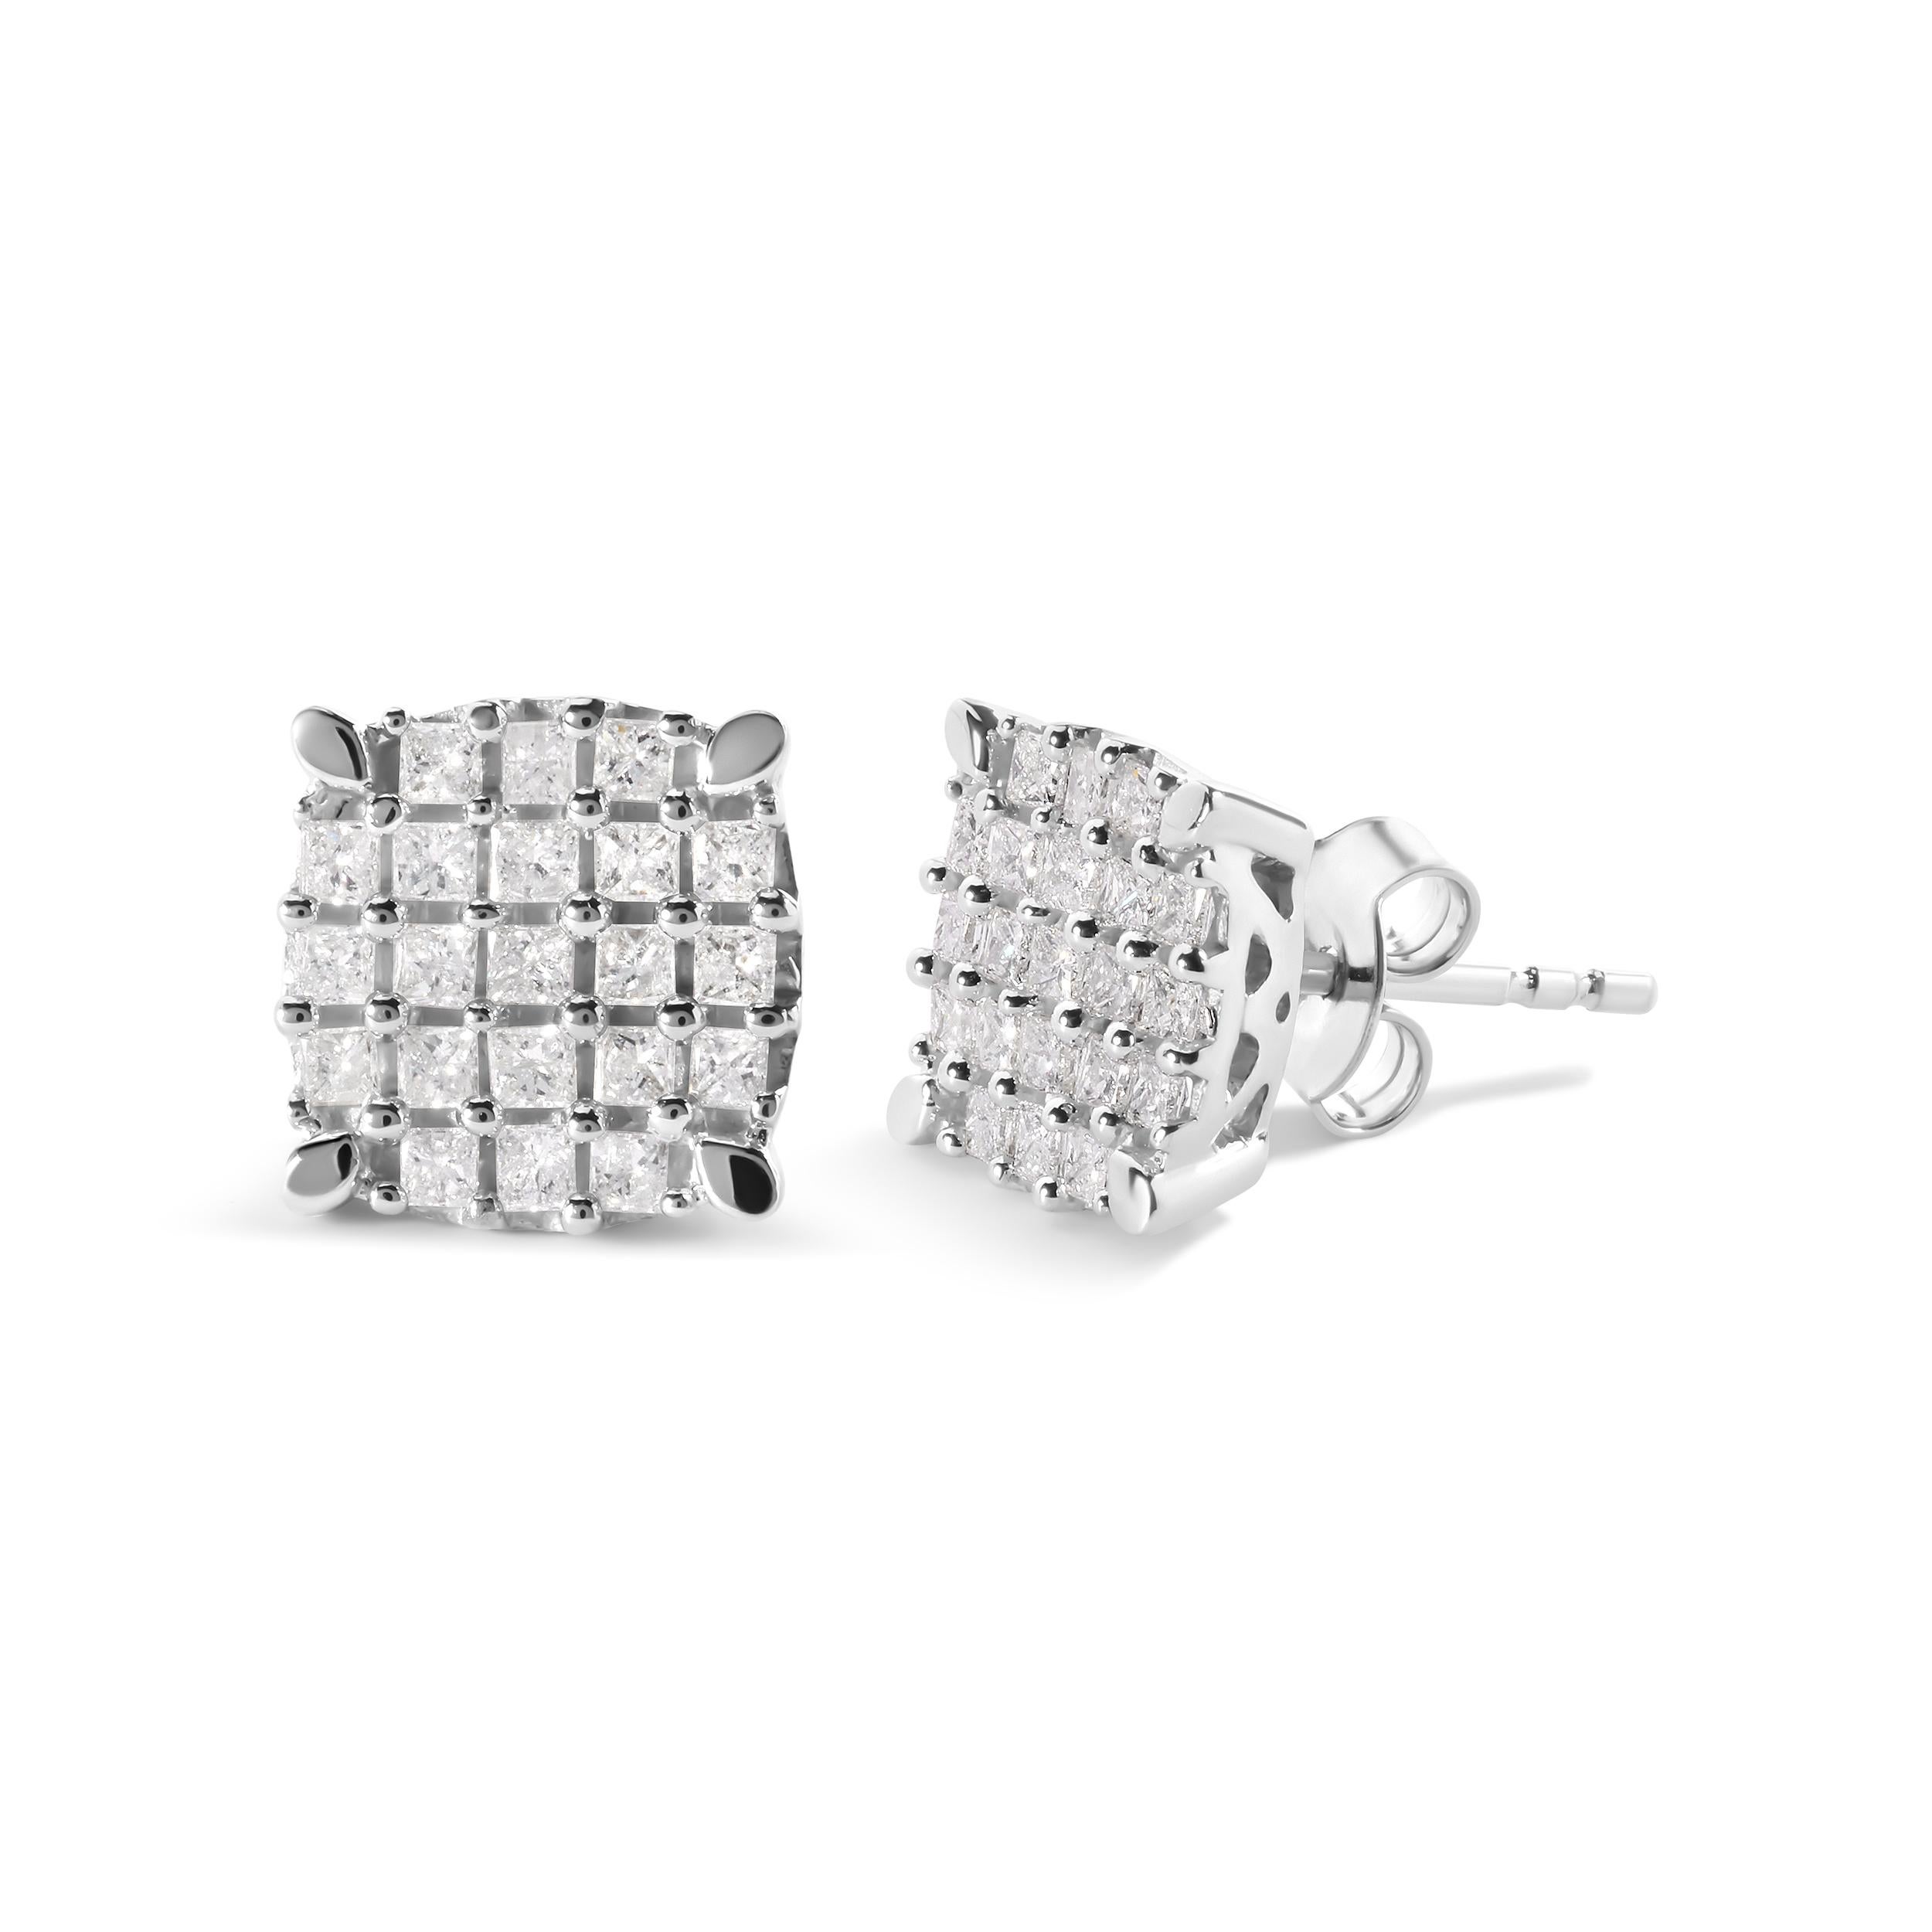 Introducing our stunning 10K white gold stud earrings, a true marvel of craftsmanship and beauty. These earrings feature a unique cushion shape design, adorned with 42 natural princess cut diamonds that sparkle and shine with a total weight of 3/4